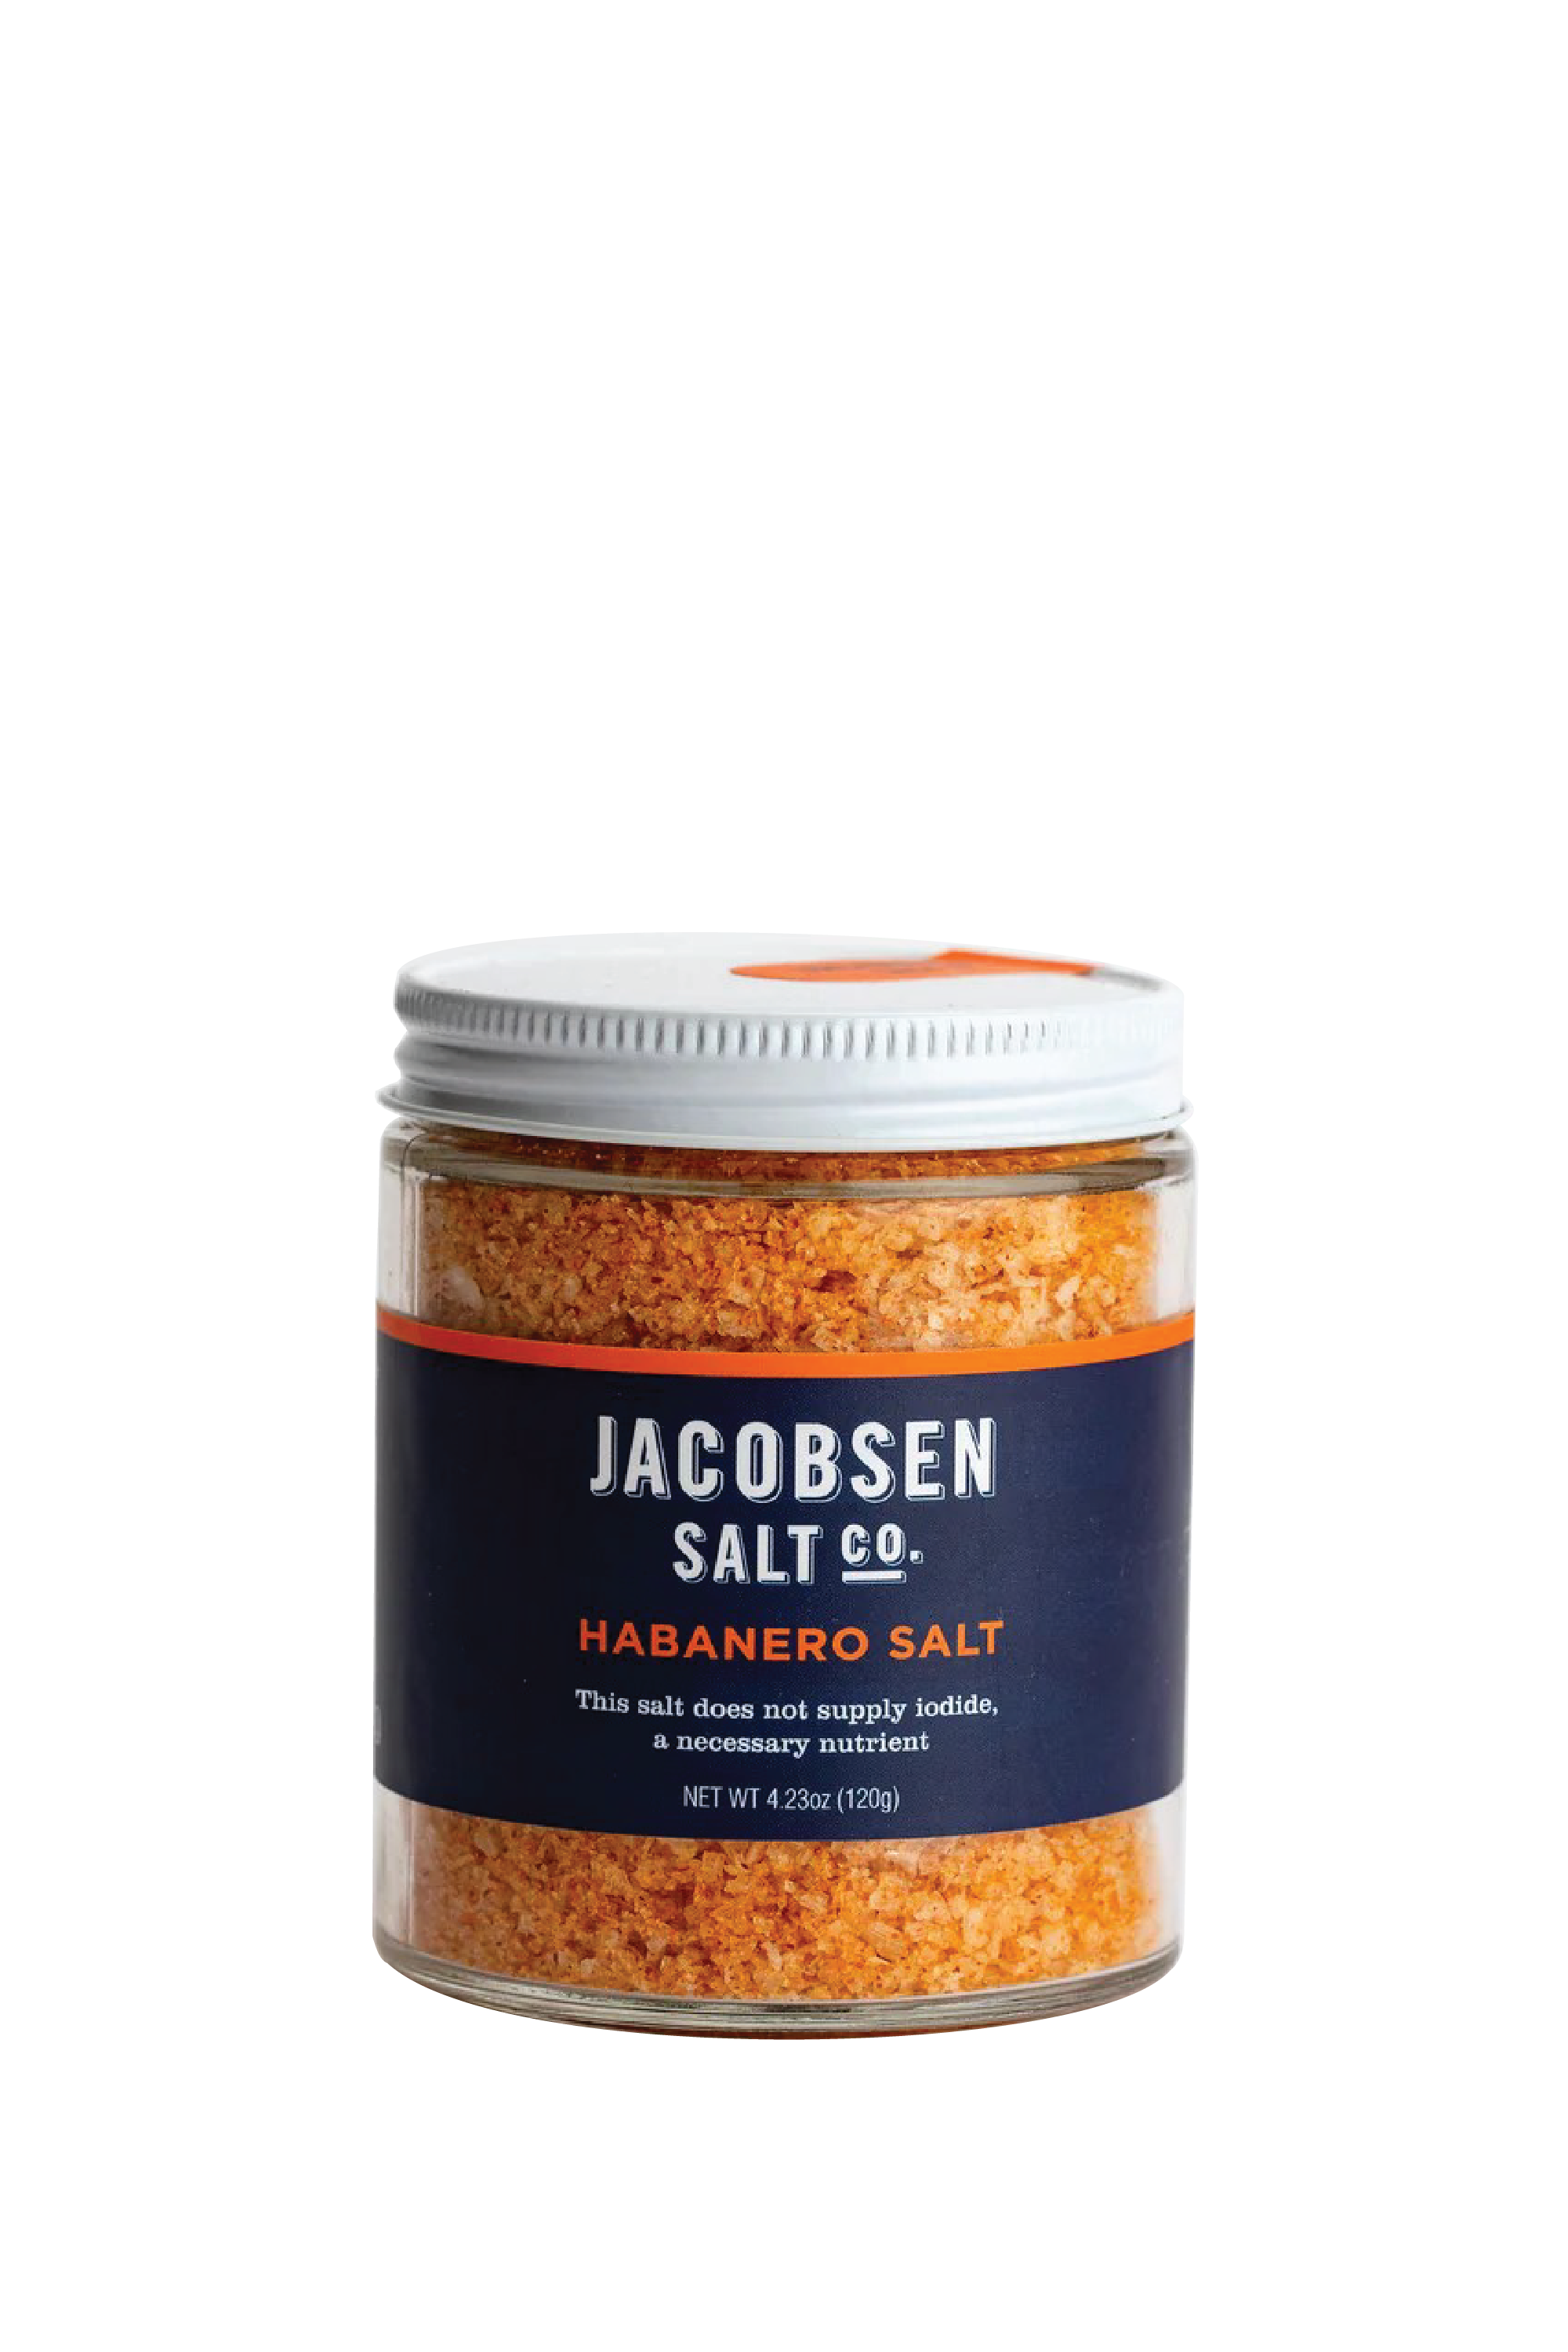 A Photo Of Habanero Salt in a glass jar with a blue label. White Background.